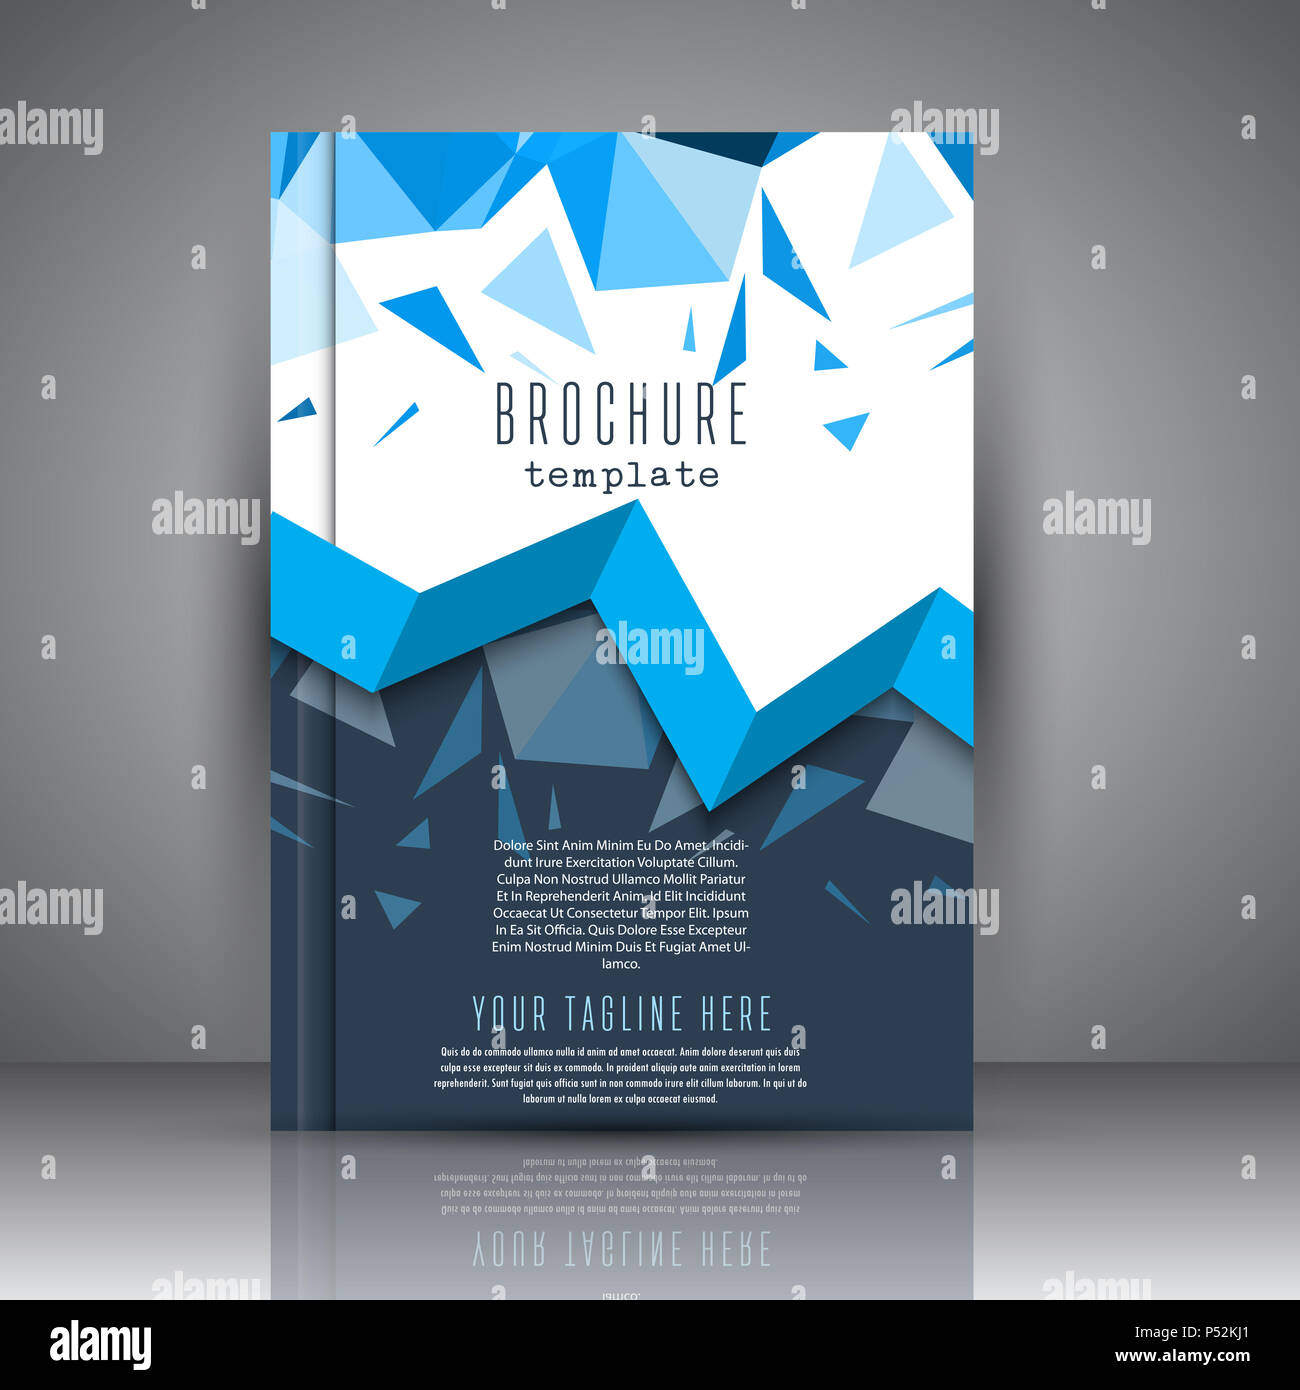 Modern brochure template with low poly design Stock Photo ...